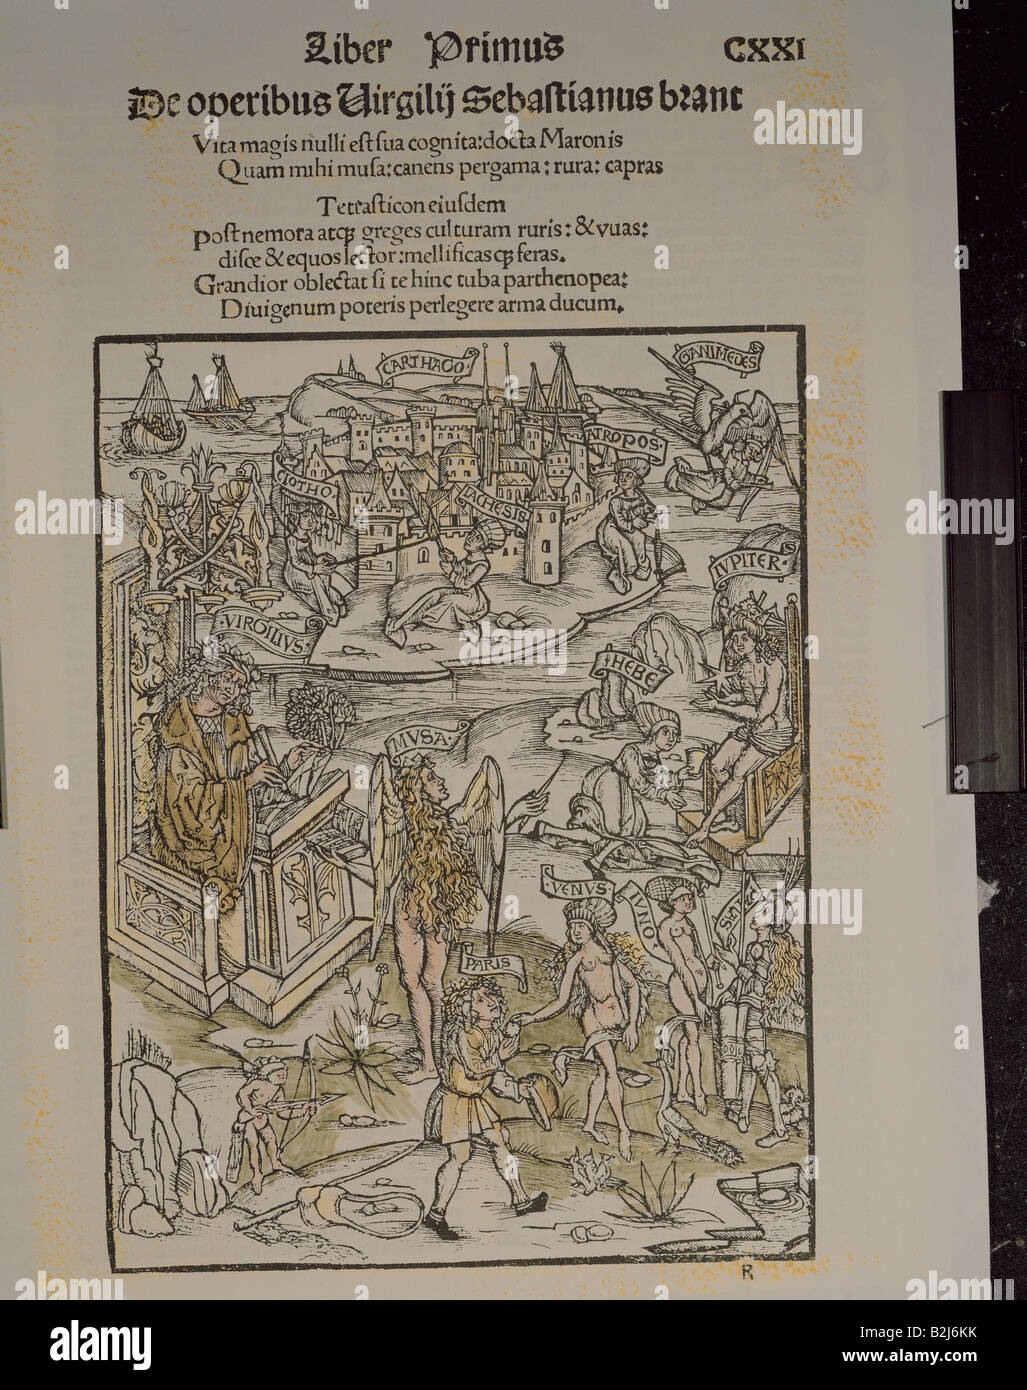 literature, Vergil, 'Aeneid', illustrations, coloured woodcut for the first volume, edition of 1502, Strasbourg, Germany, edited by Sebastian Brant (1457-1521), printed by Johannes Grueninger, private collection, Stock Photo